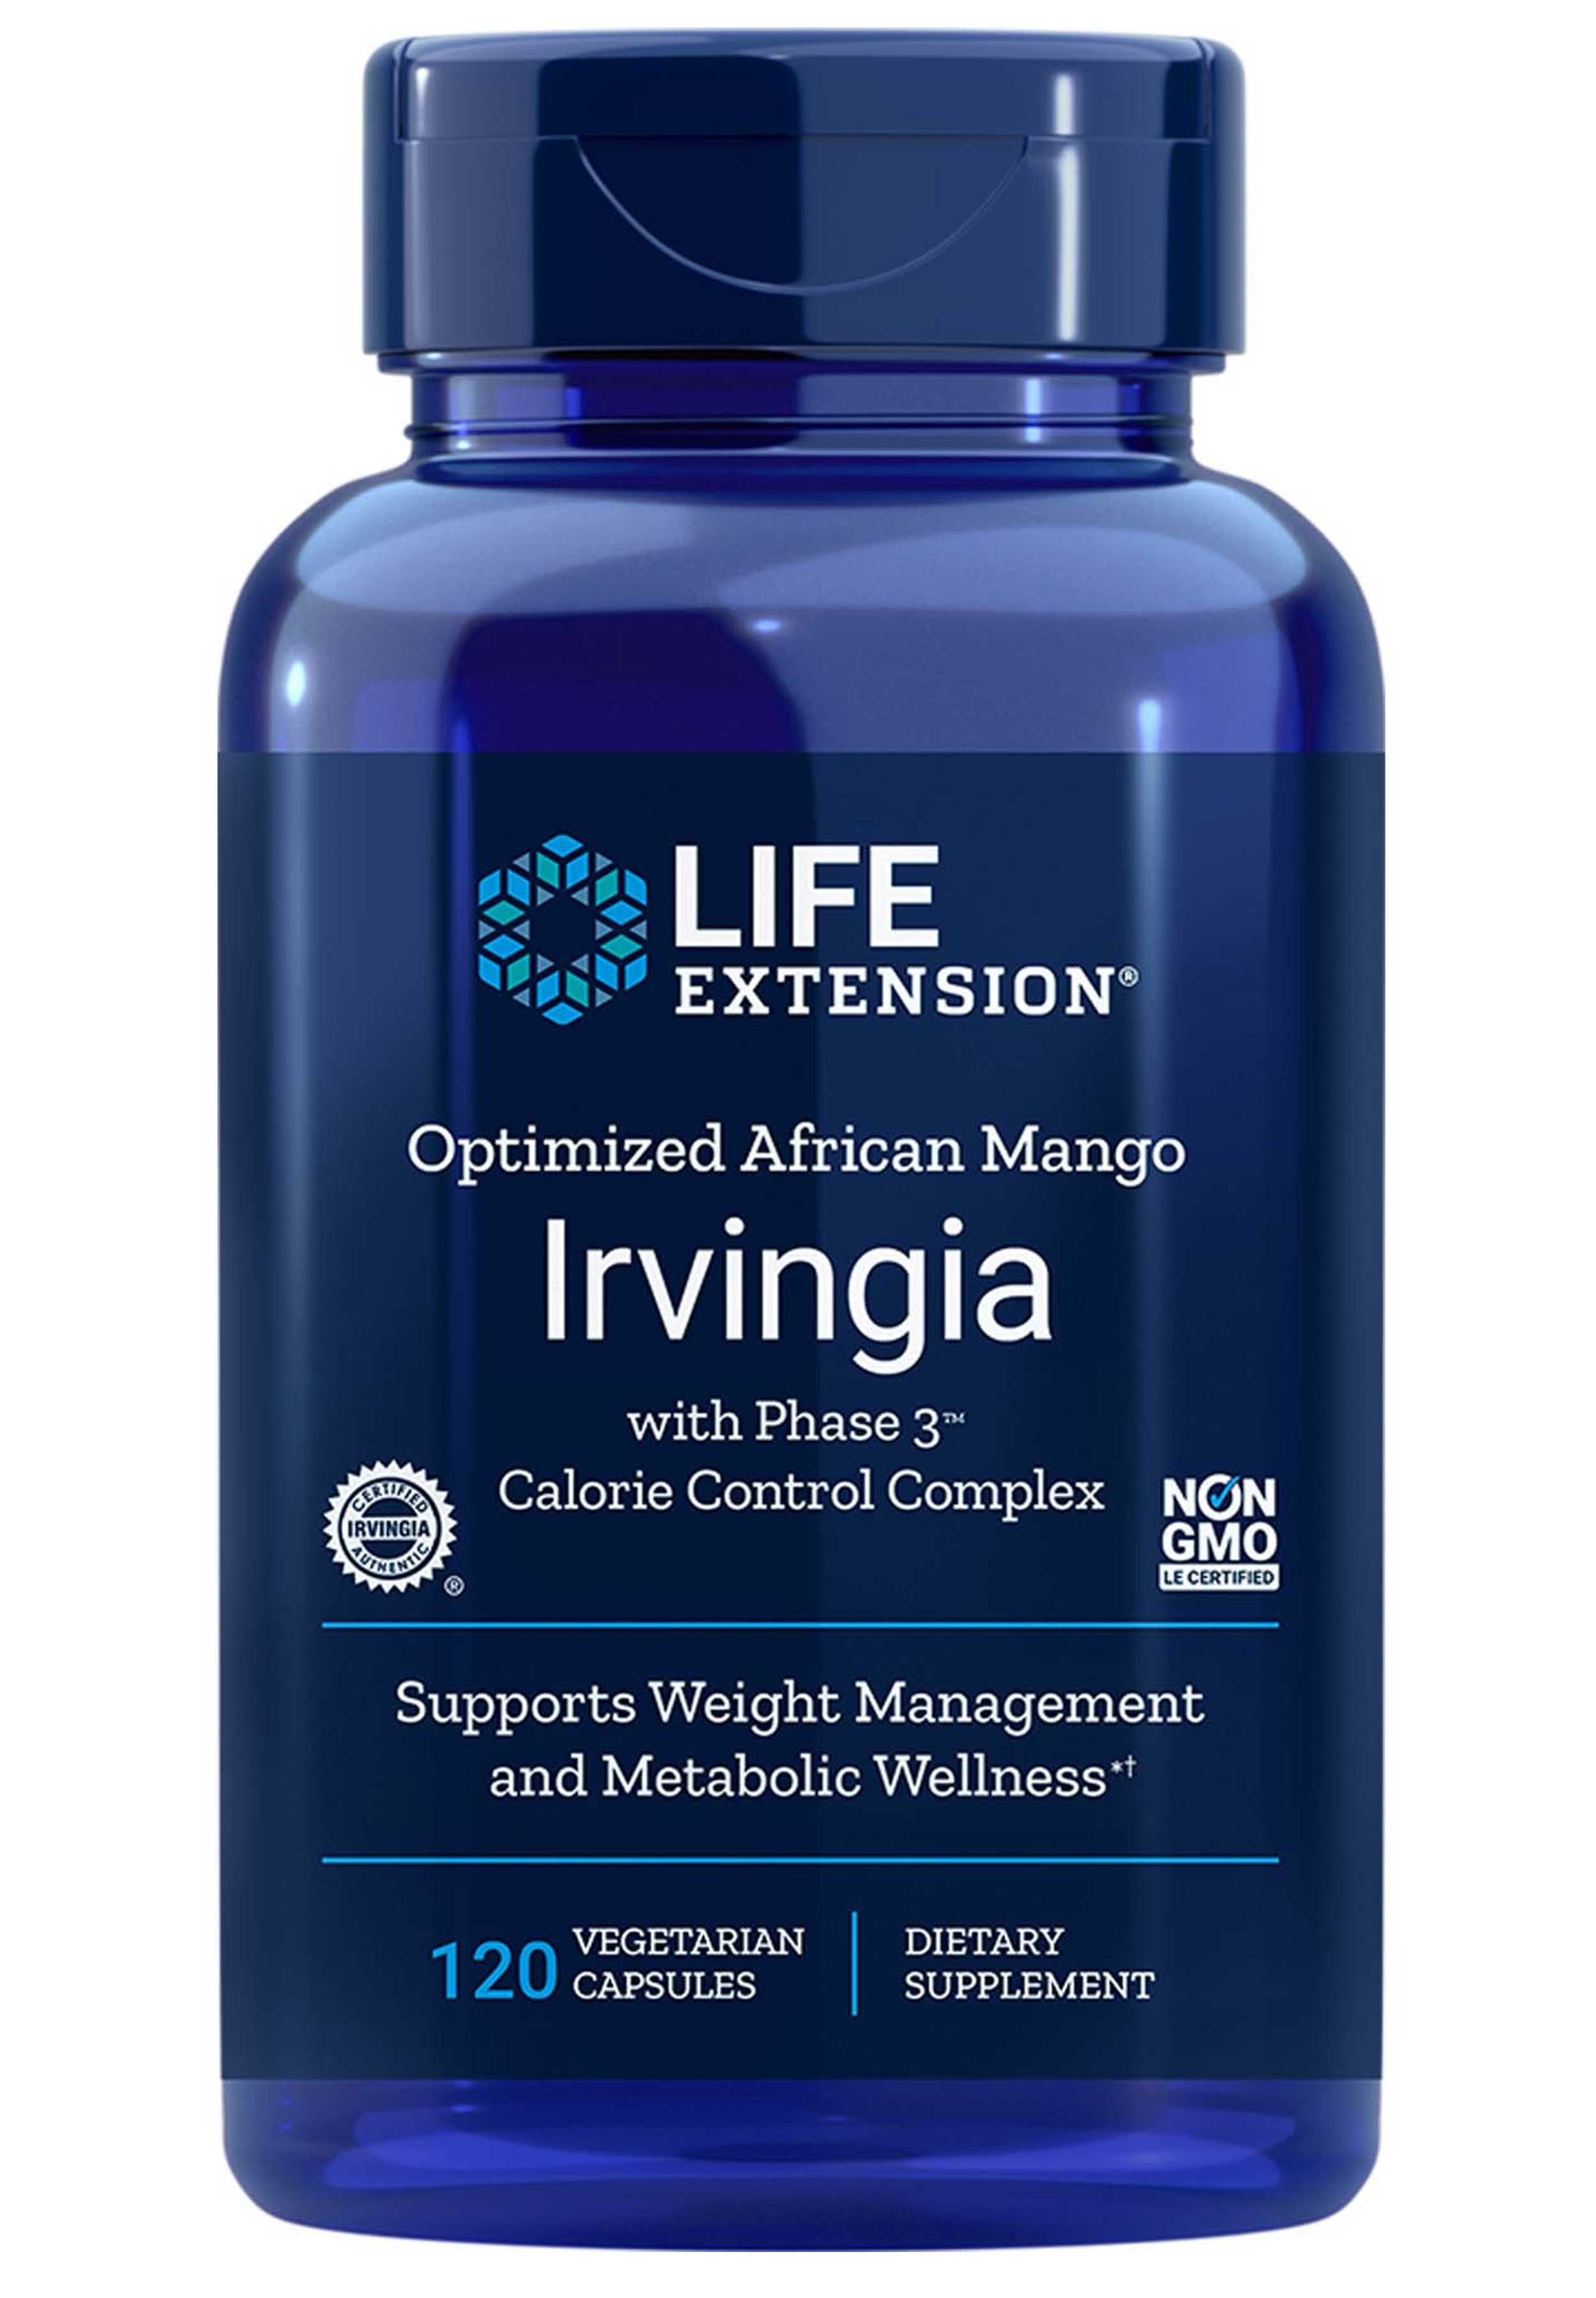 Life Extension Optimized Irvingia With Phase 3 Calorie Control Complex